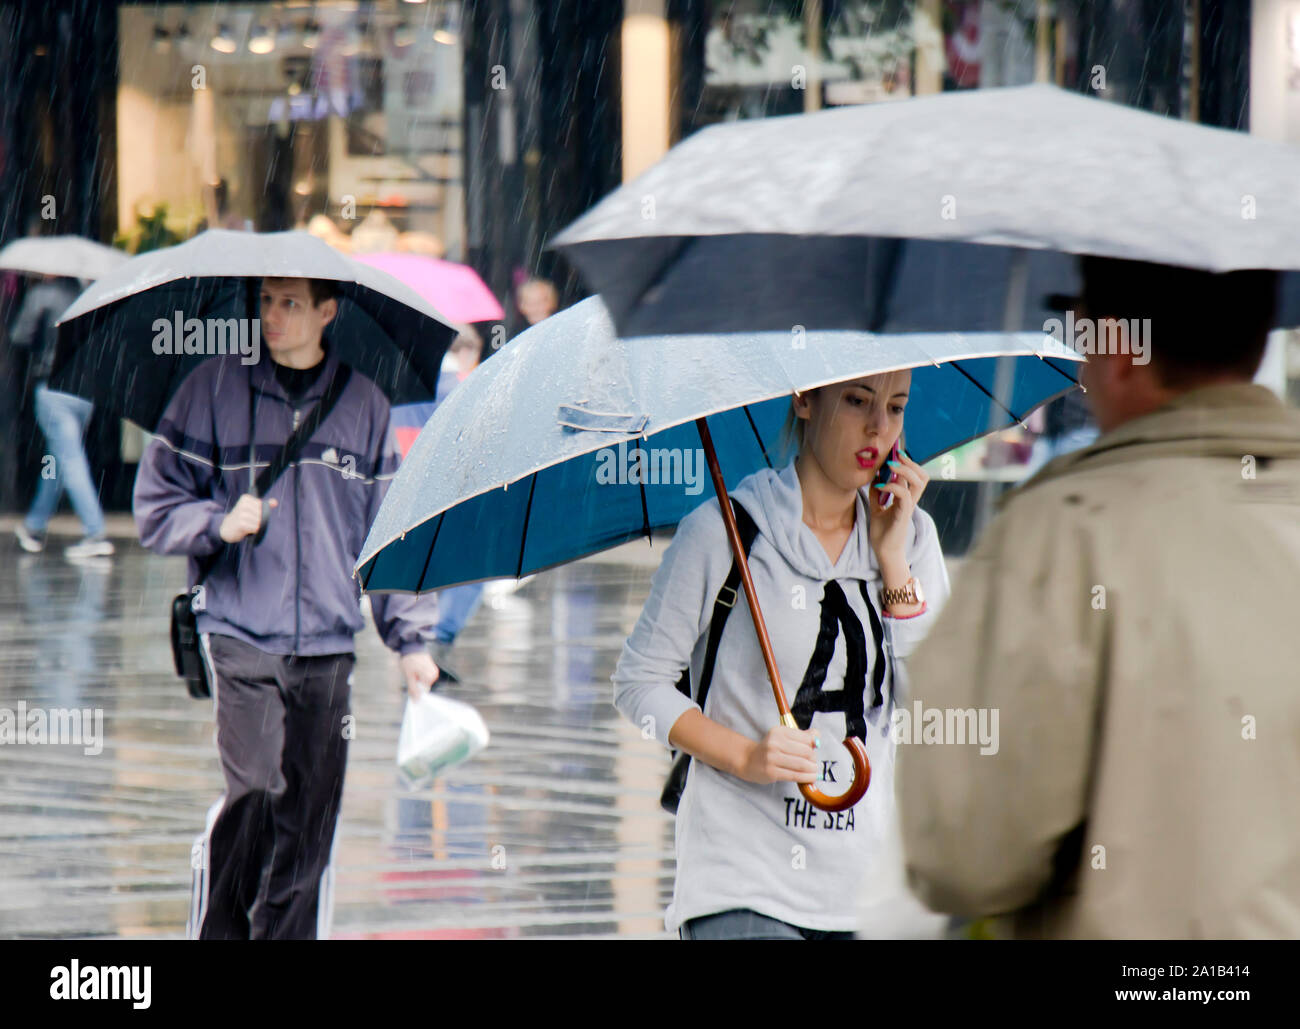 Belgrade, Serbia- September 24, 2018: Young woman walking in a hurry under umbrella while talking on a mobile phone on a rainy and crowd city street Stock Photo